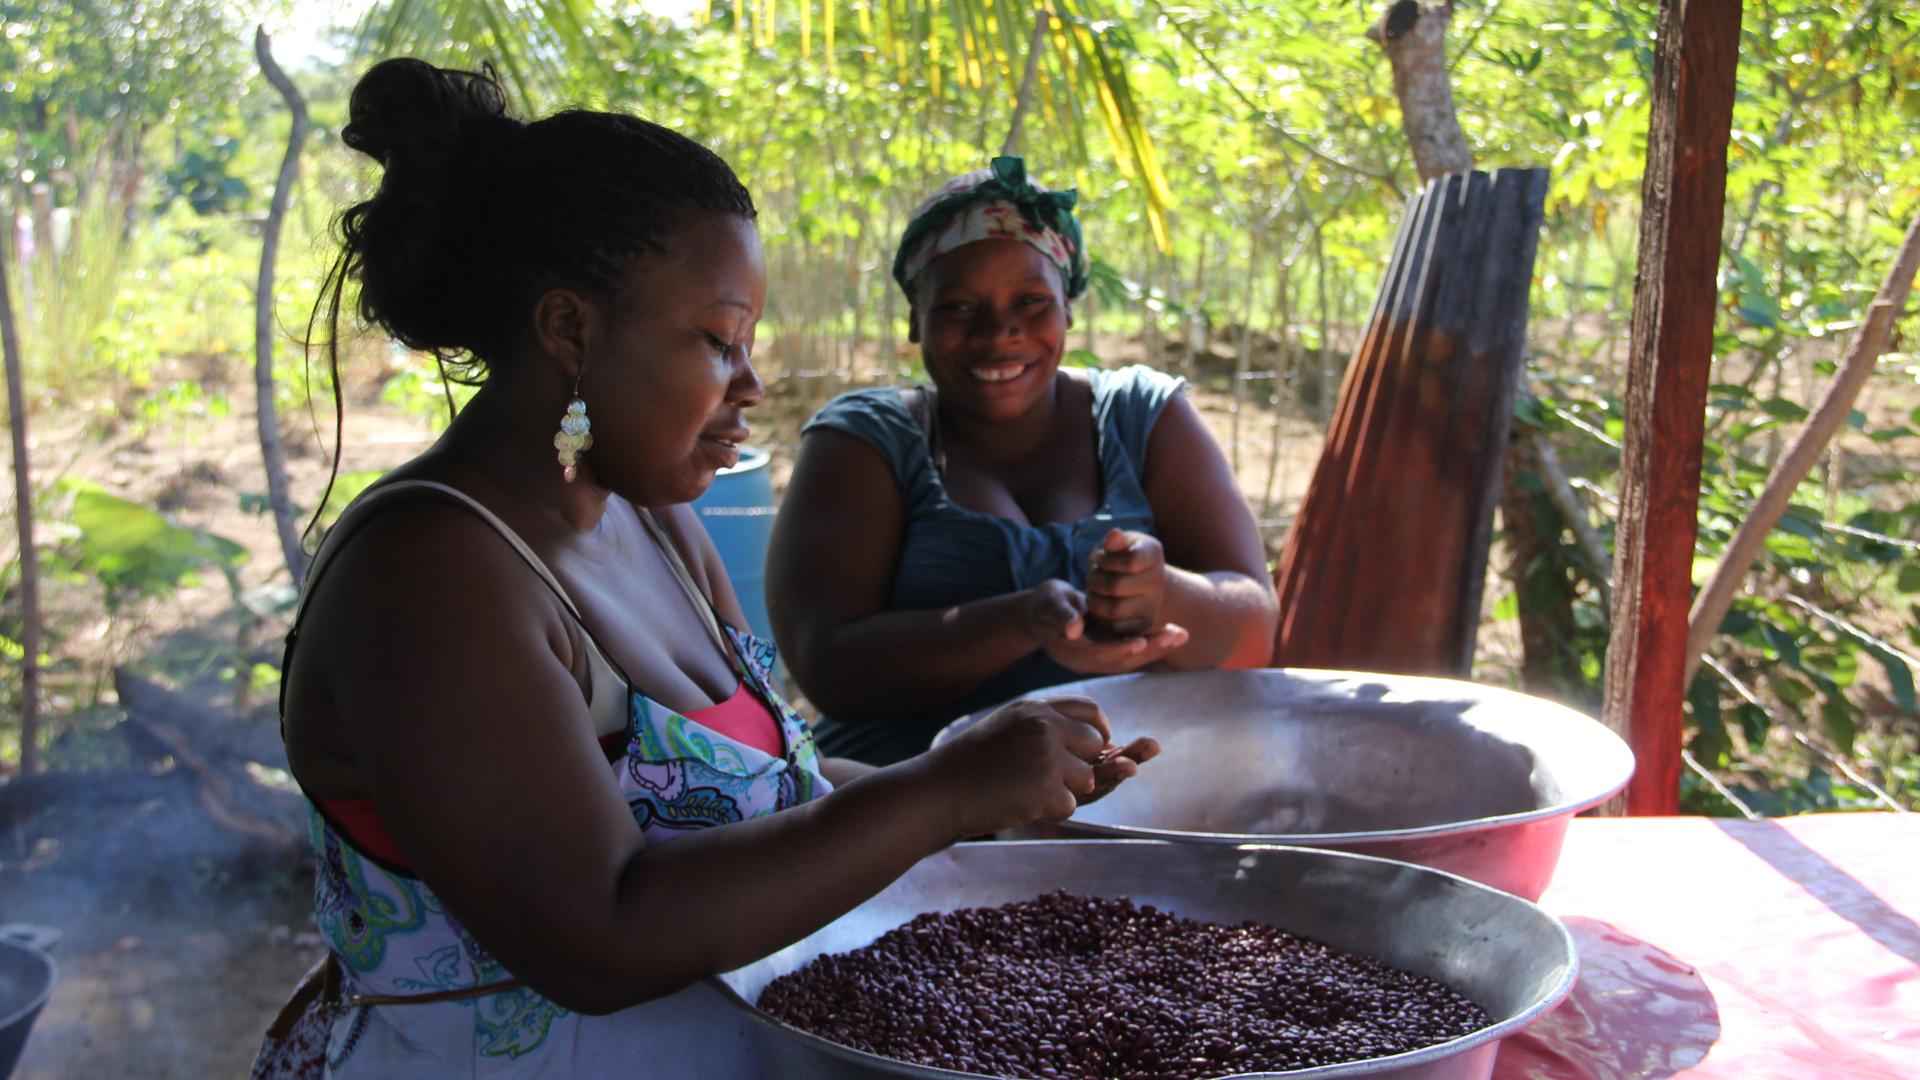 Garifuna women in Vallecito prepare beans for a communal meal.